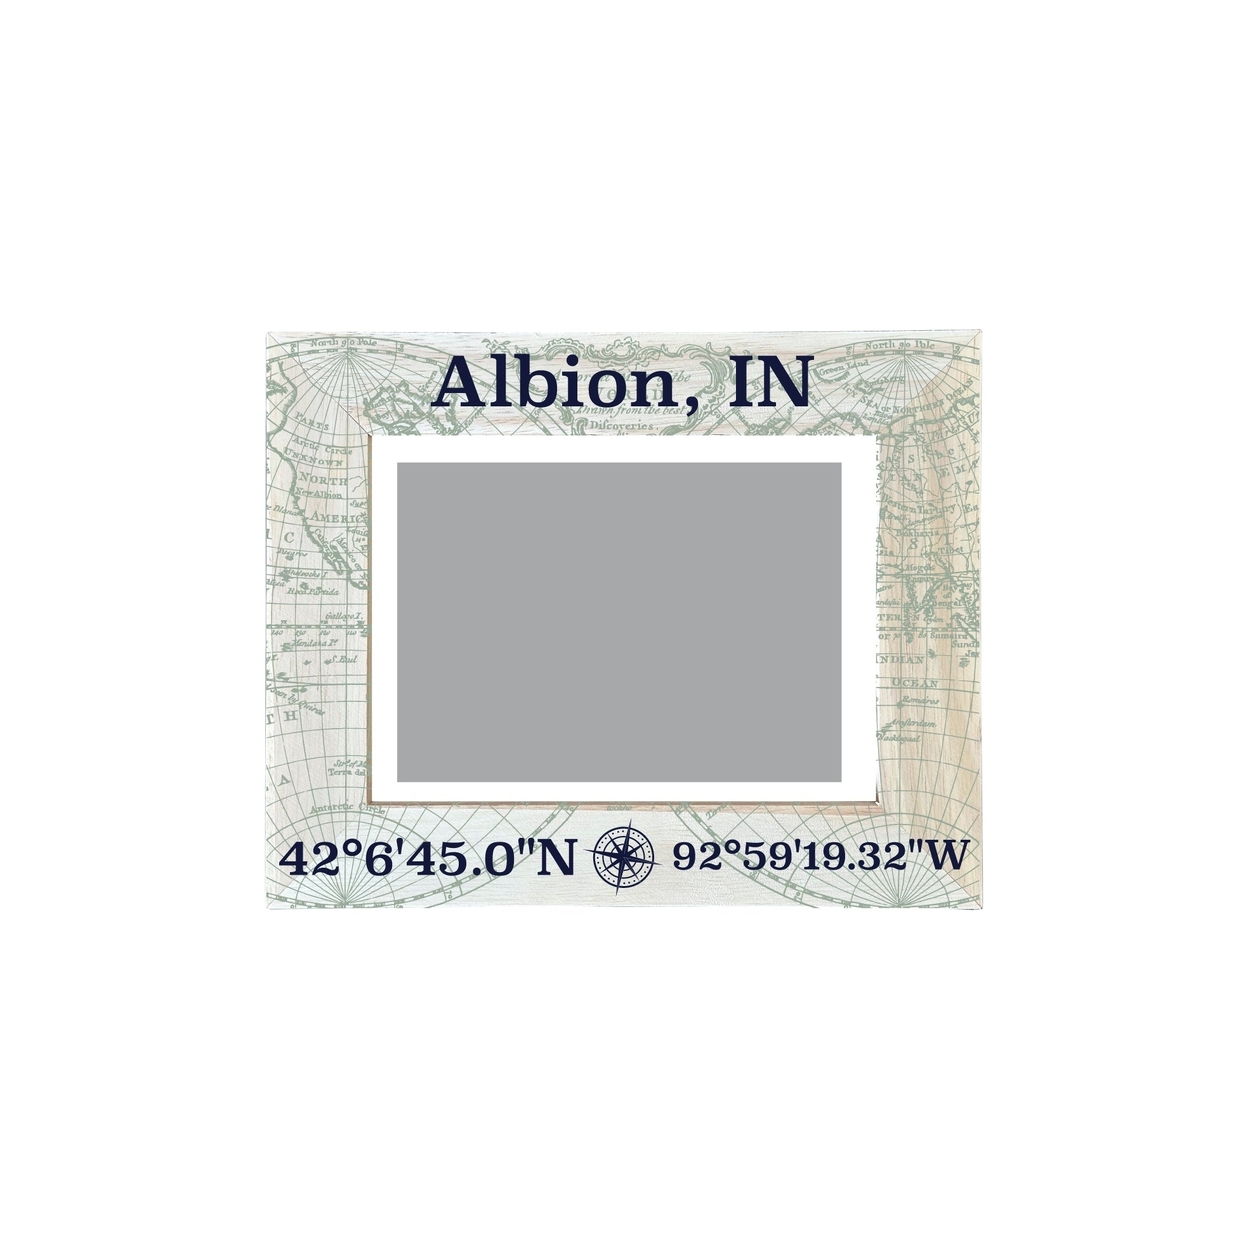 Albion Indiana Souvenir Wooden Photo Frame Compass Coordinates Design Matted To 4 X 6